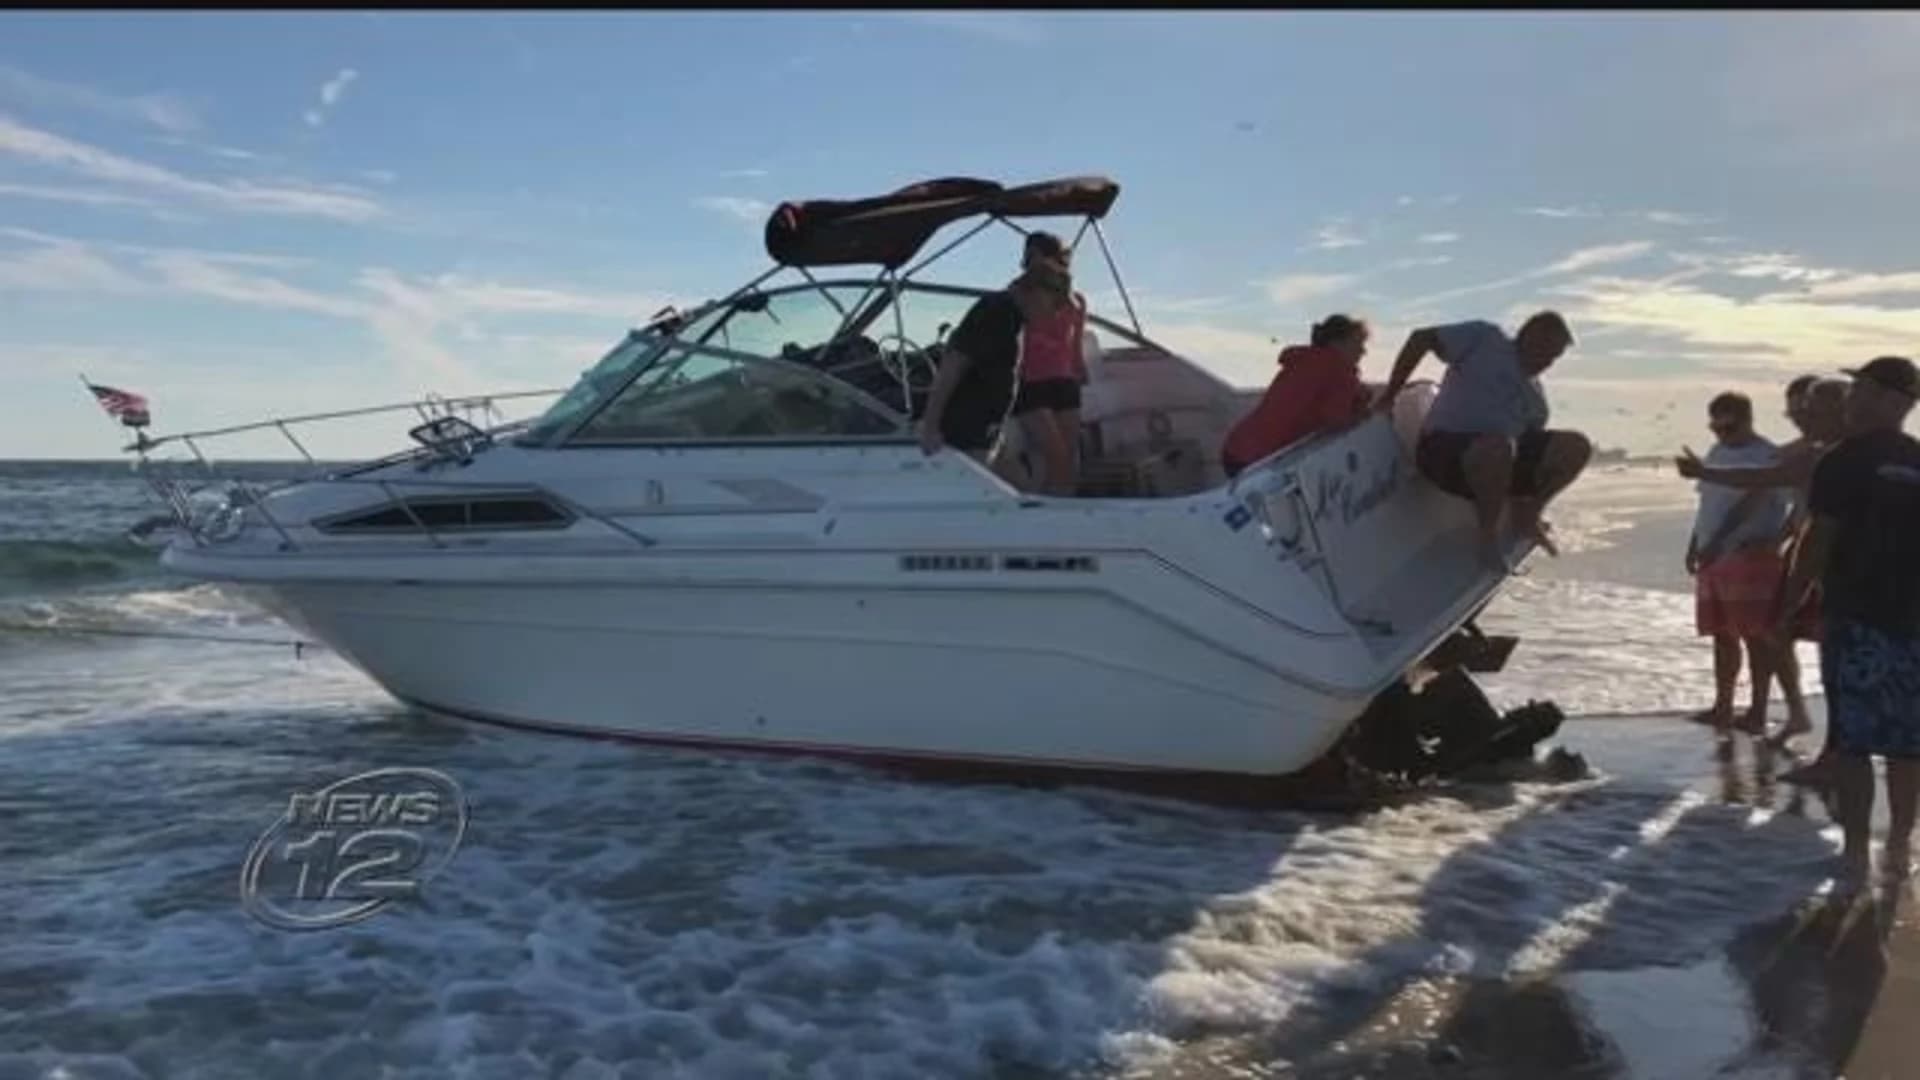 Boat washes ashore in Lido Beach